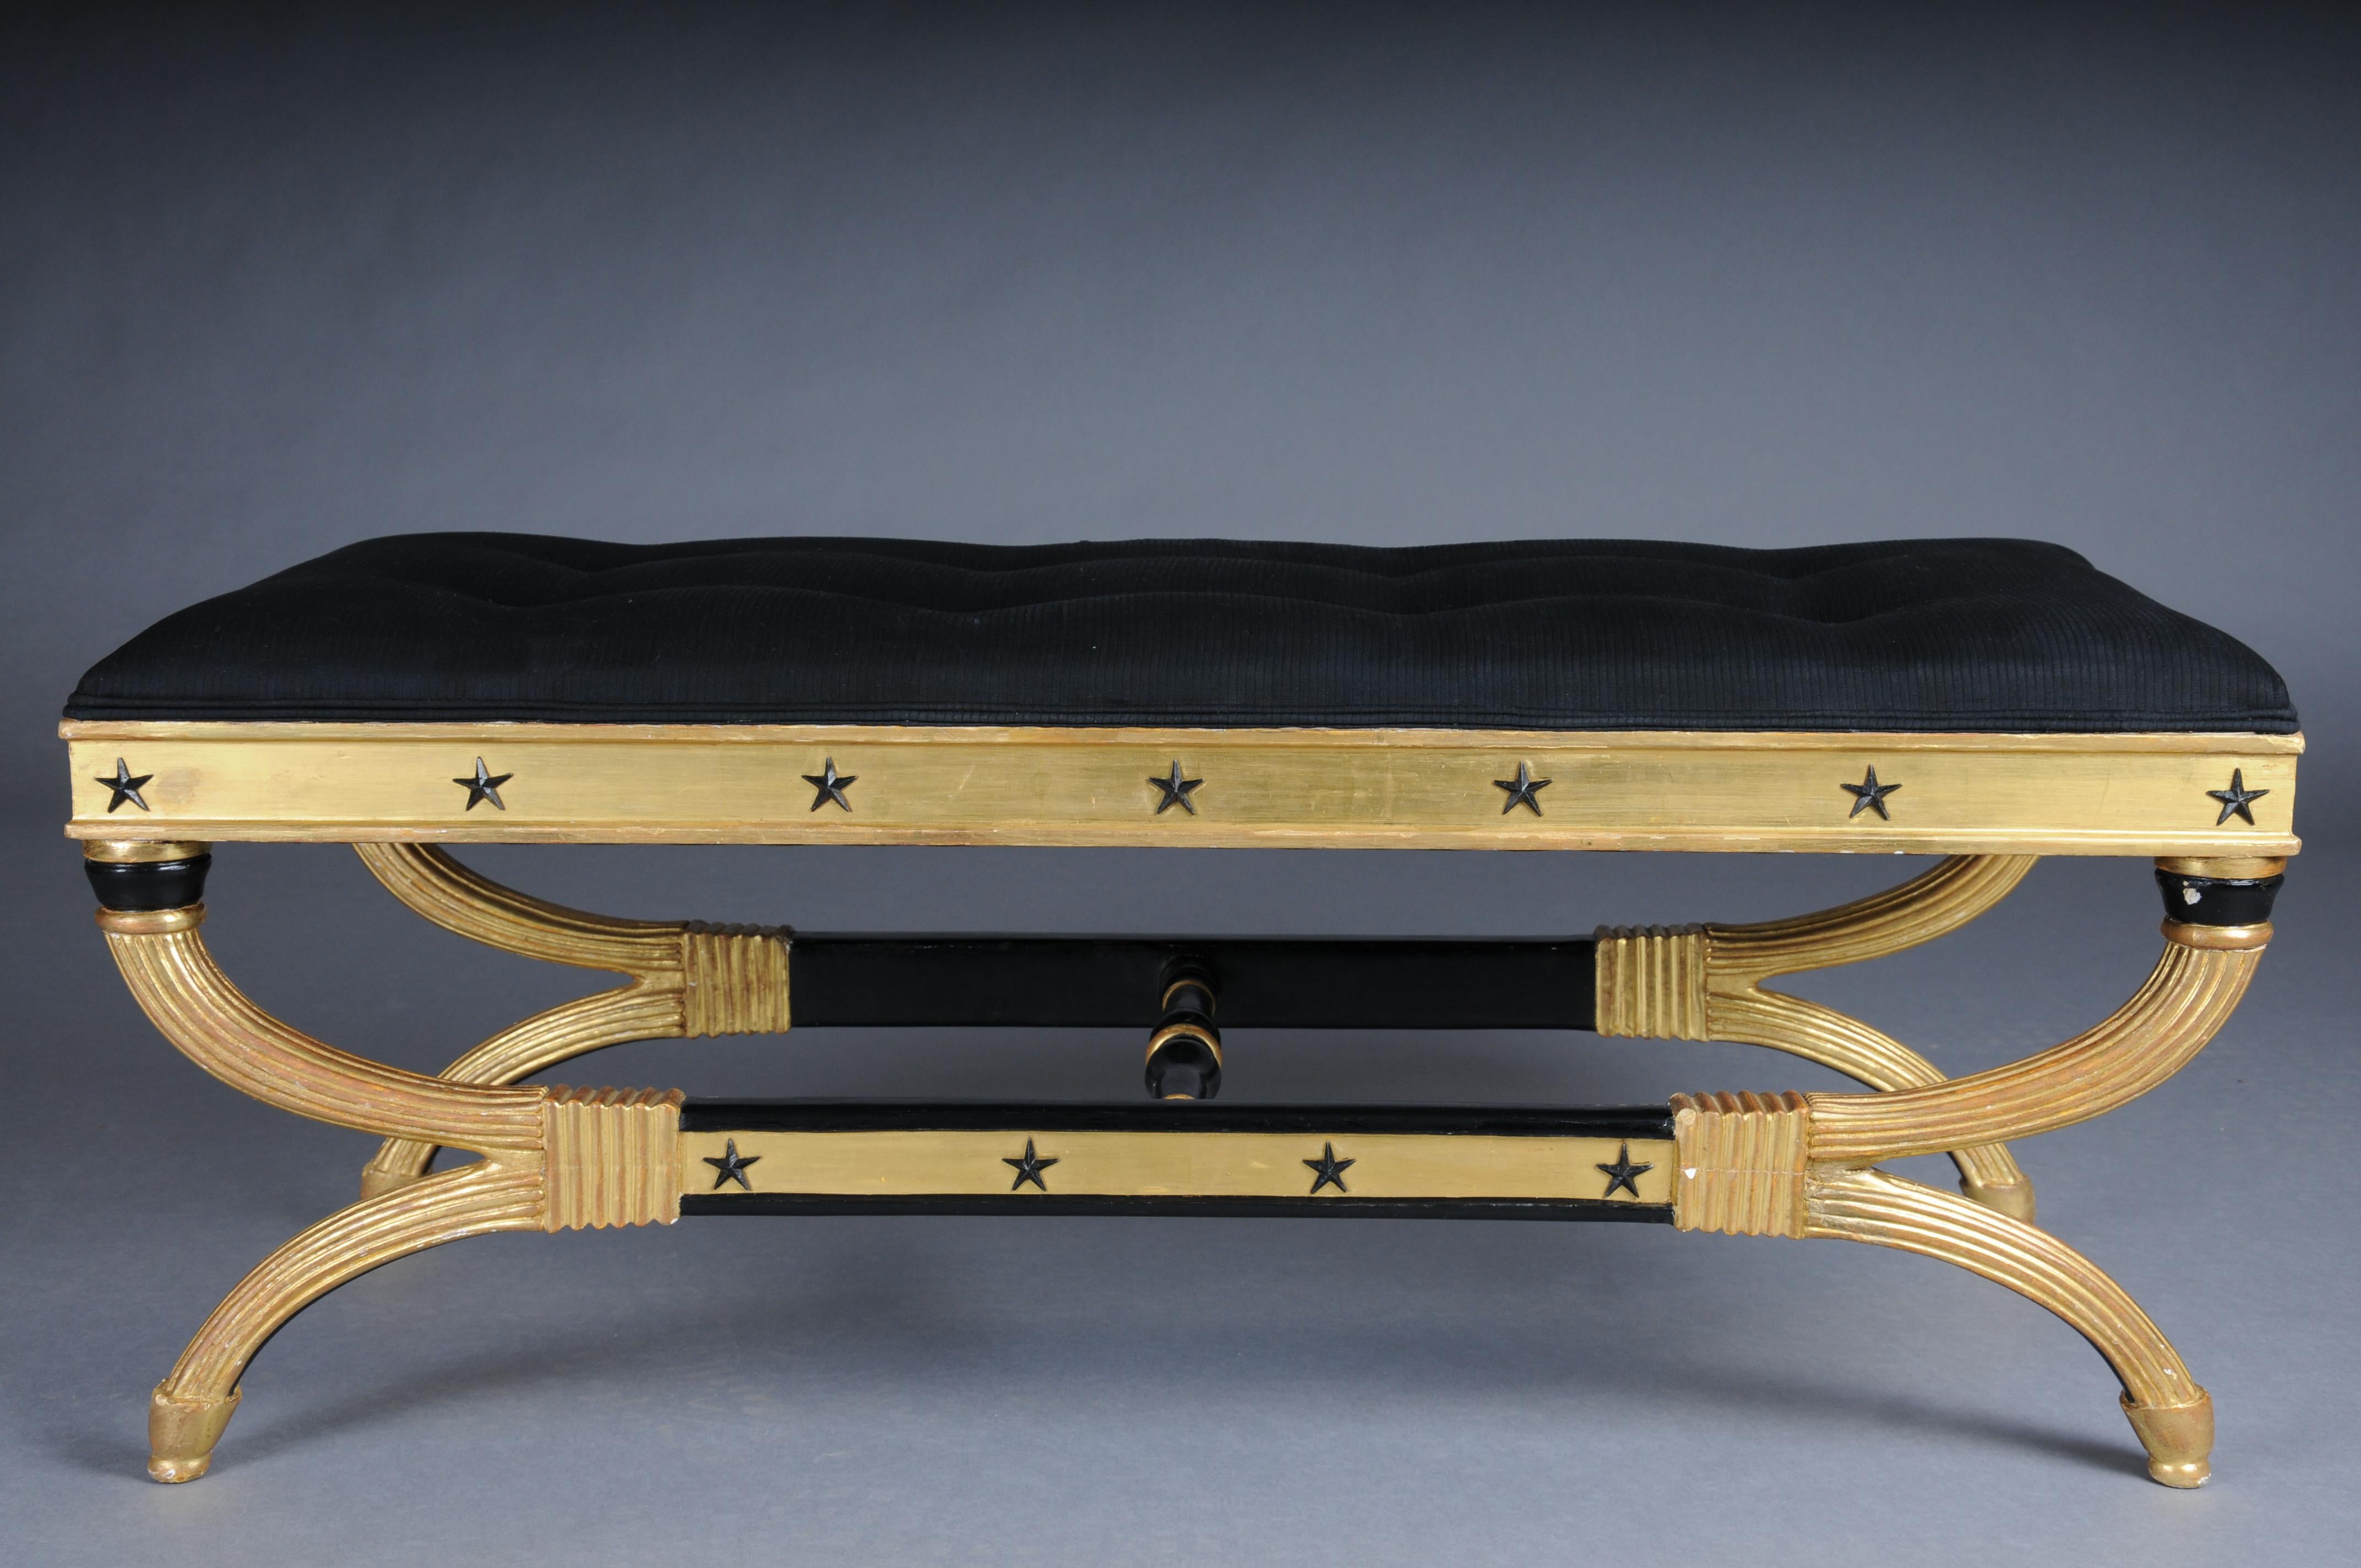 French Royal Empire bench, gold-plated, black